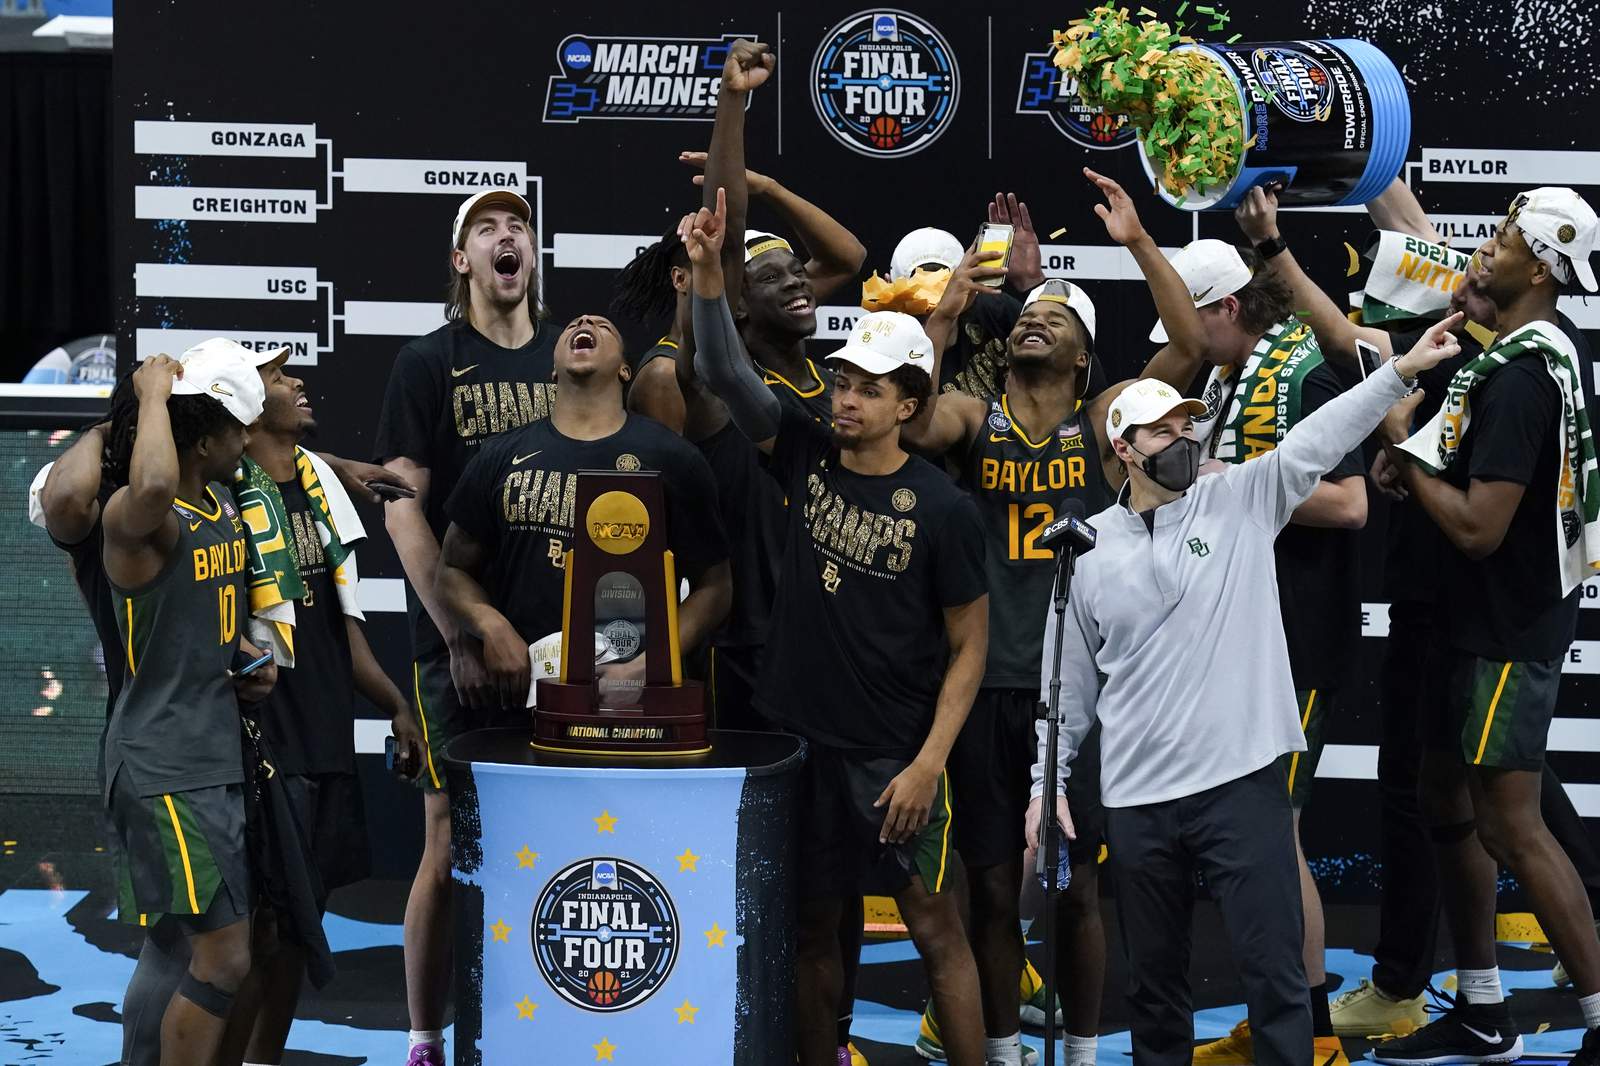 About 17 million view Baylor's championship win over Gonzaga